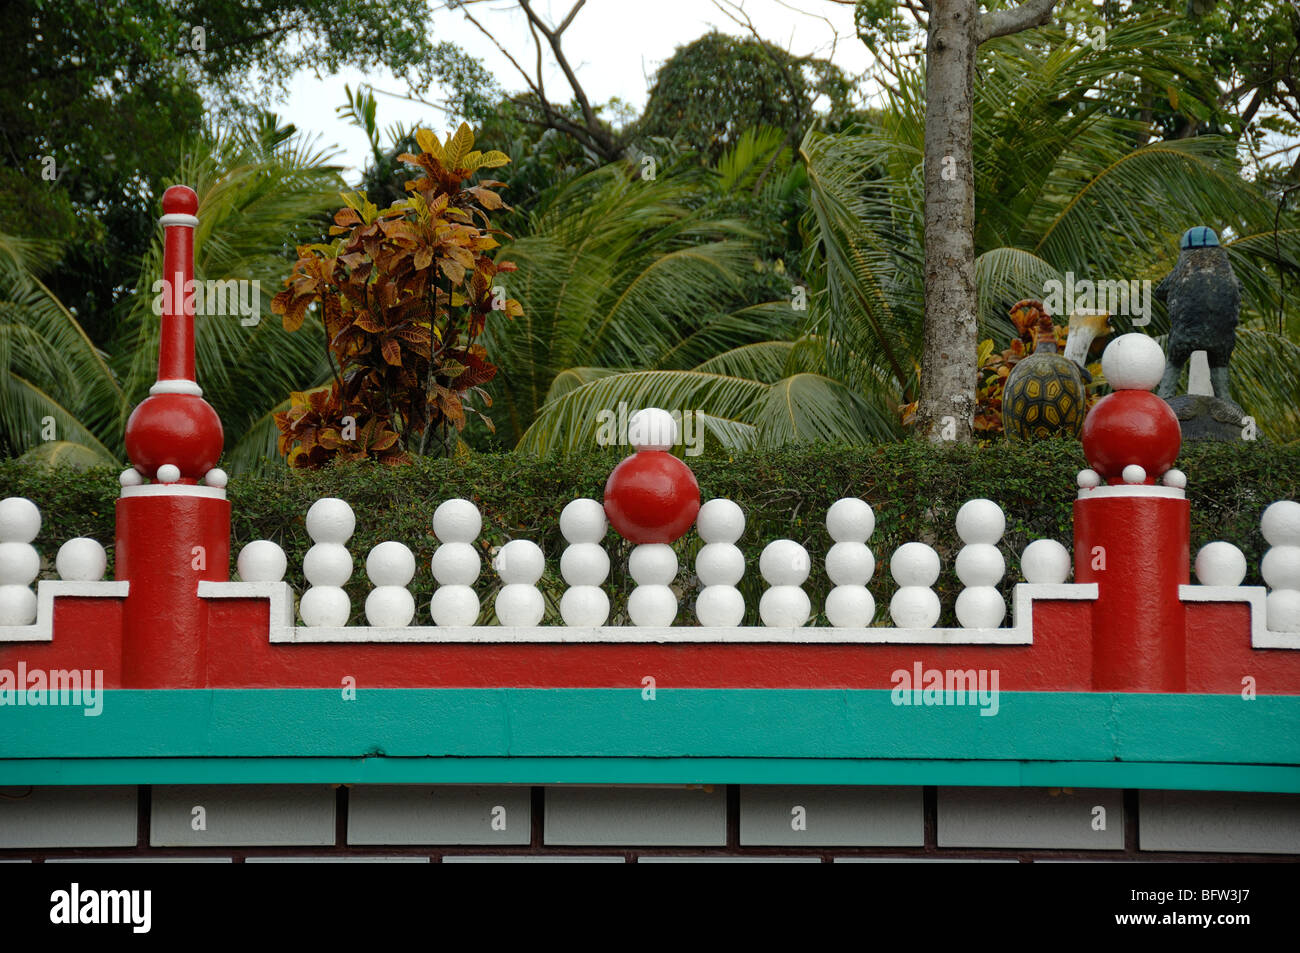 Unusual or Decorative Red & Turquoise Wall with White Balls at the Tiger Balm Gardens Chinese Theme Park, Singapore Stock Photo